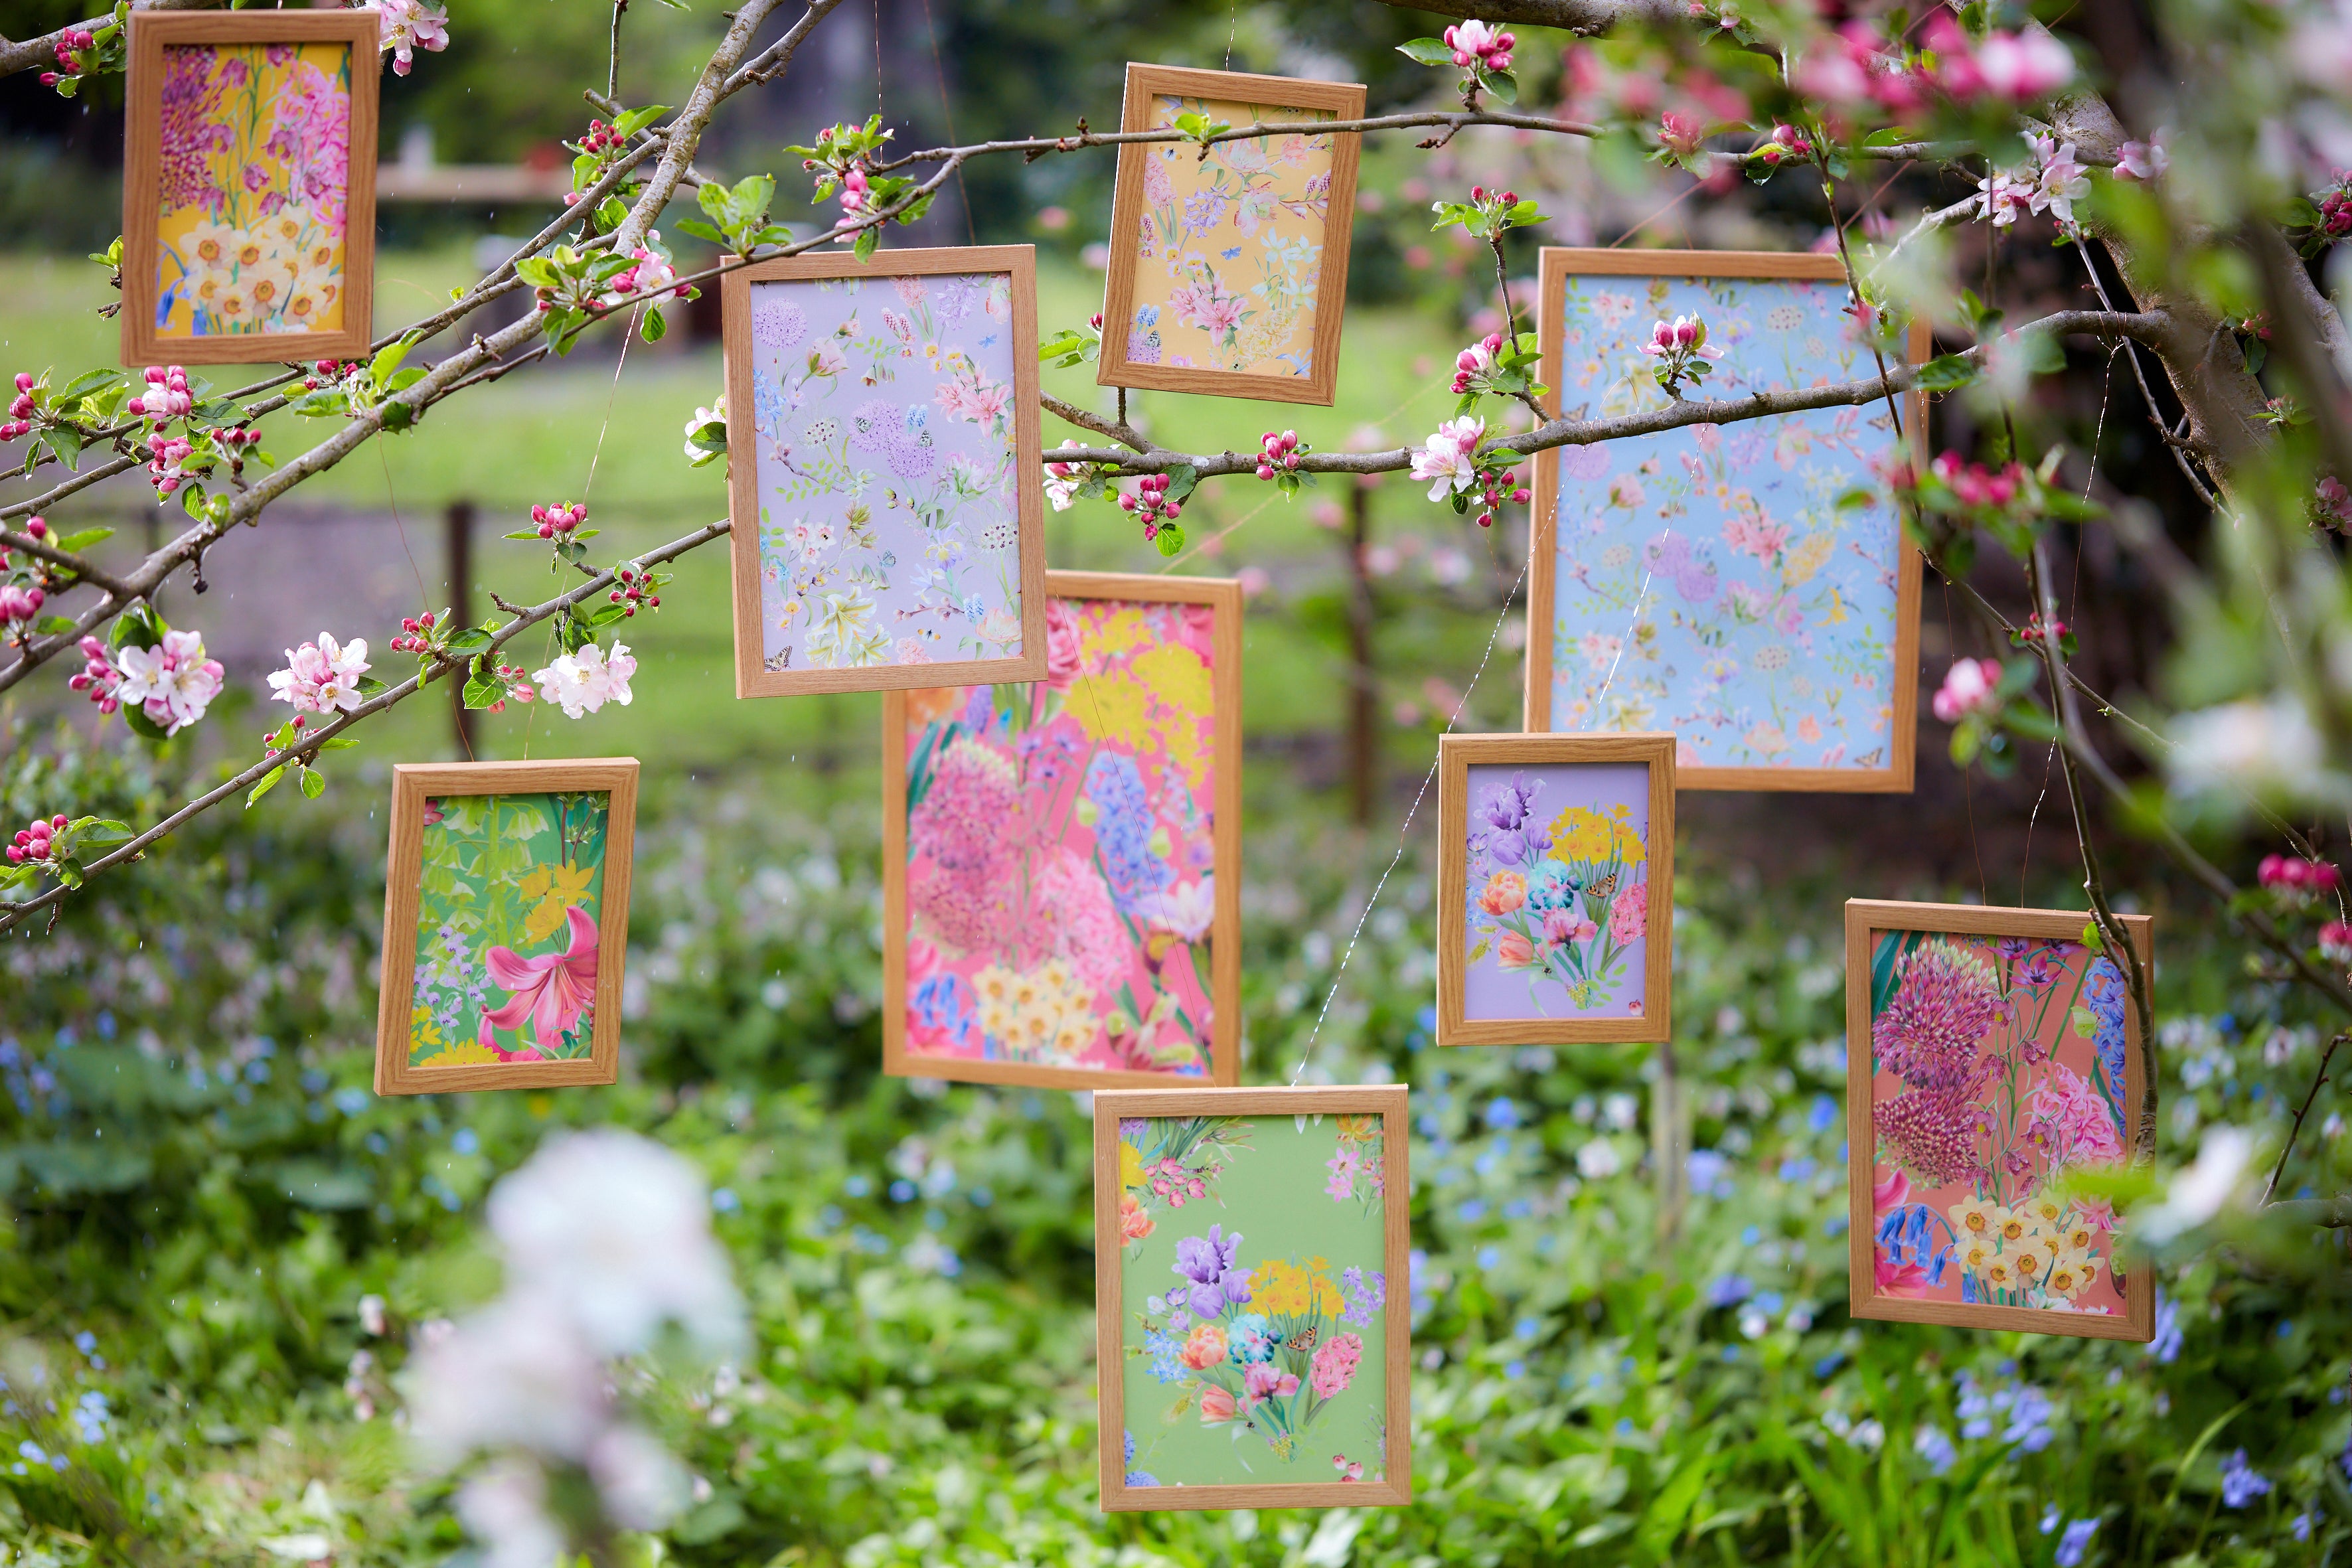 collection of floral patterned wallpapers hanging in picture frames from a tree